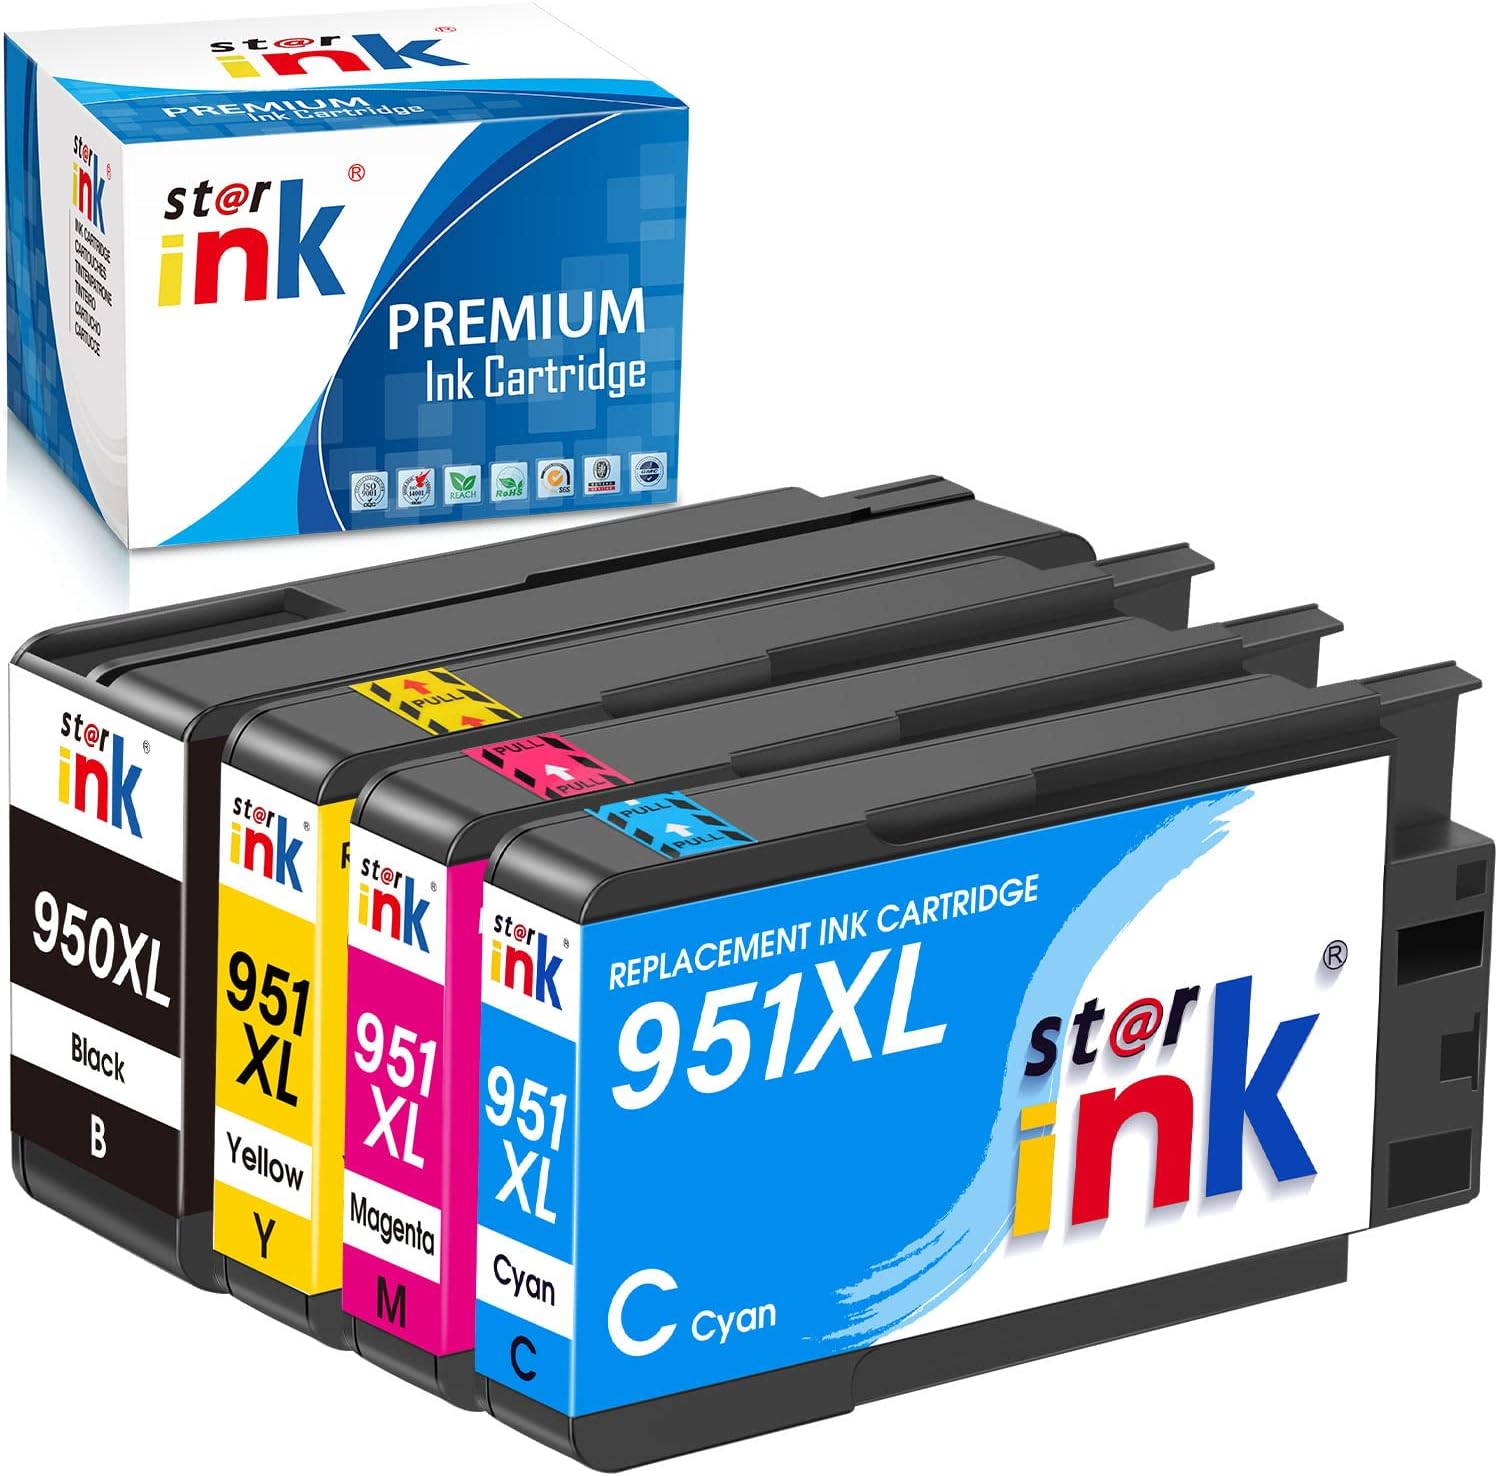 950XL 951XL Combo Ink Cartridges Replacement for HP OfficeJet Pro Printer(Black Cyan Magenta Yellow) 4-Pack - Linford Office:Printer Ink & Toner Cartridge